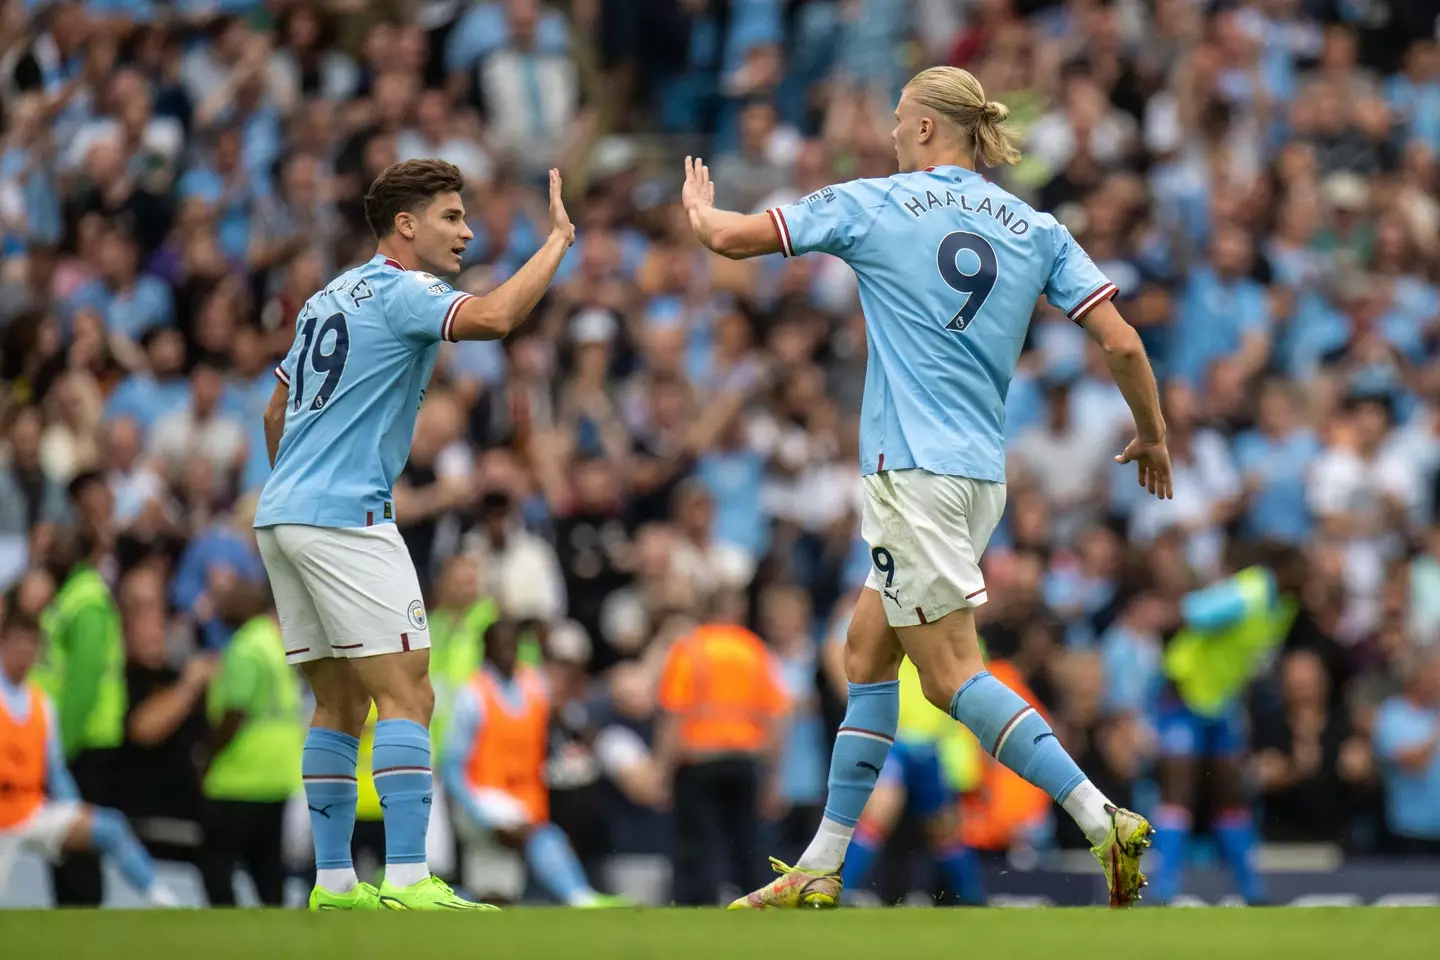 Alvarez has had to be patient for his chances at Manchester City given Erling Haaland's form.